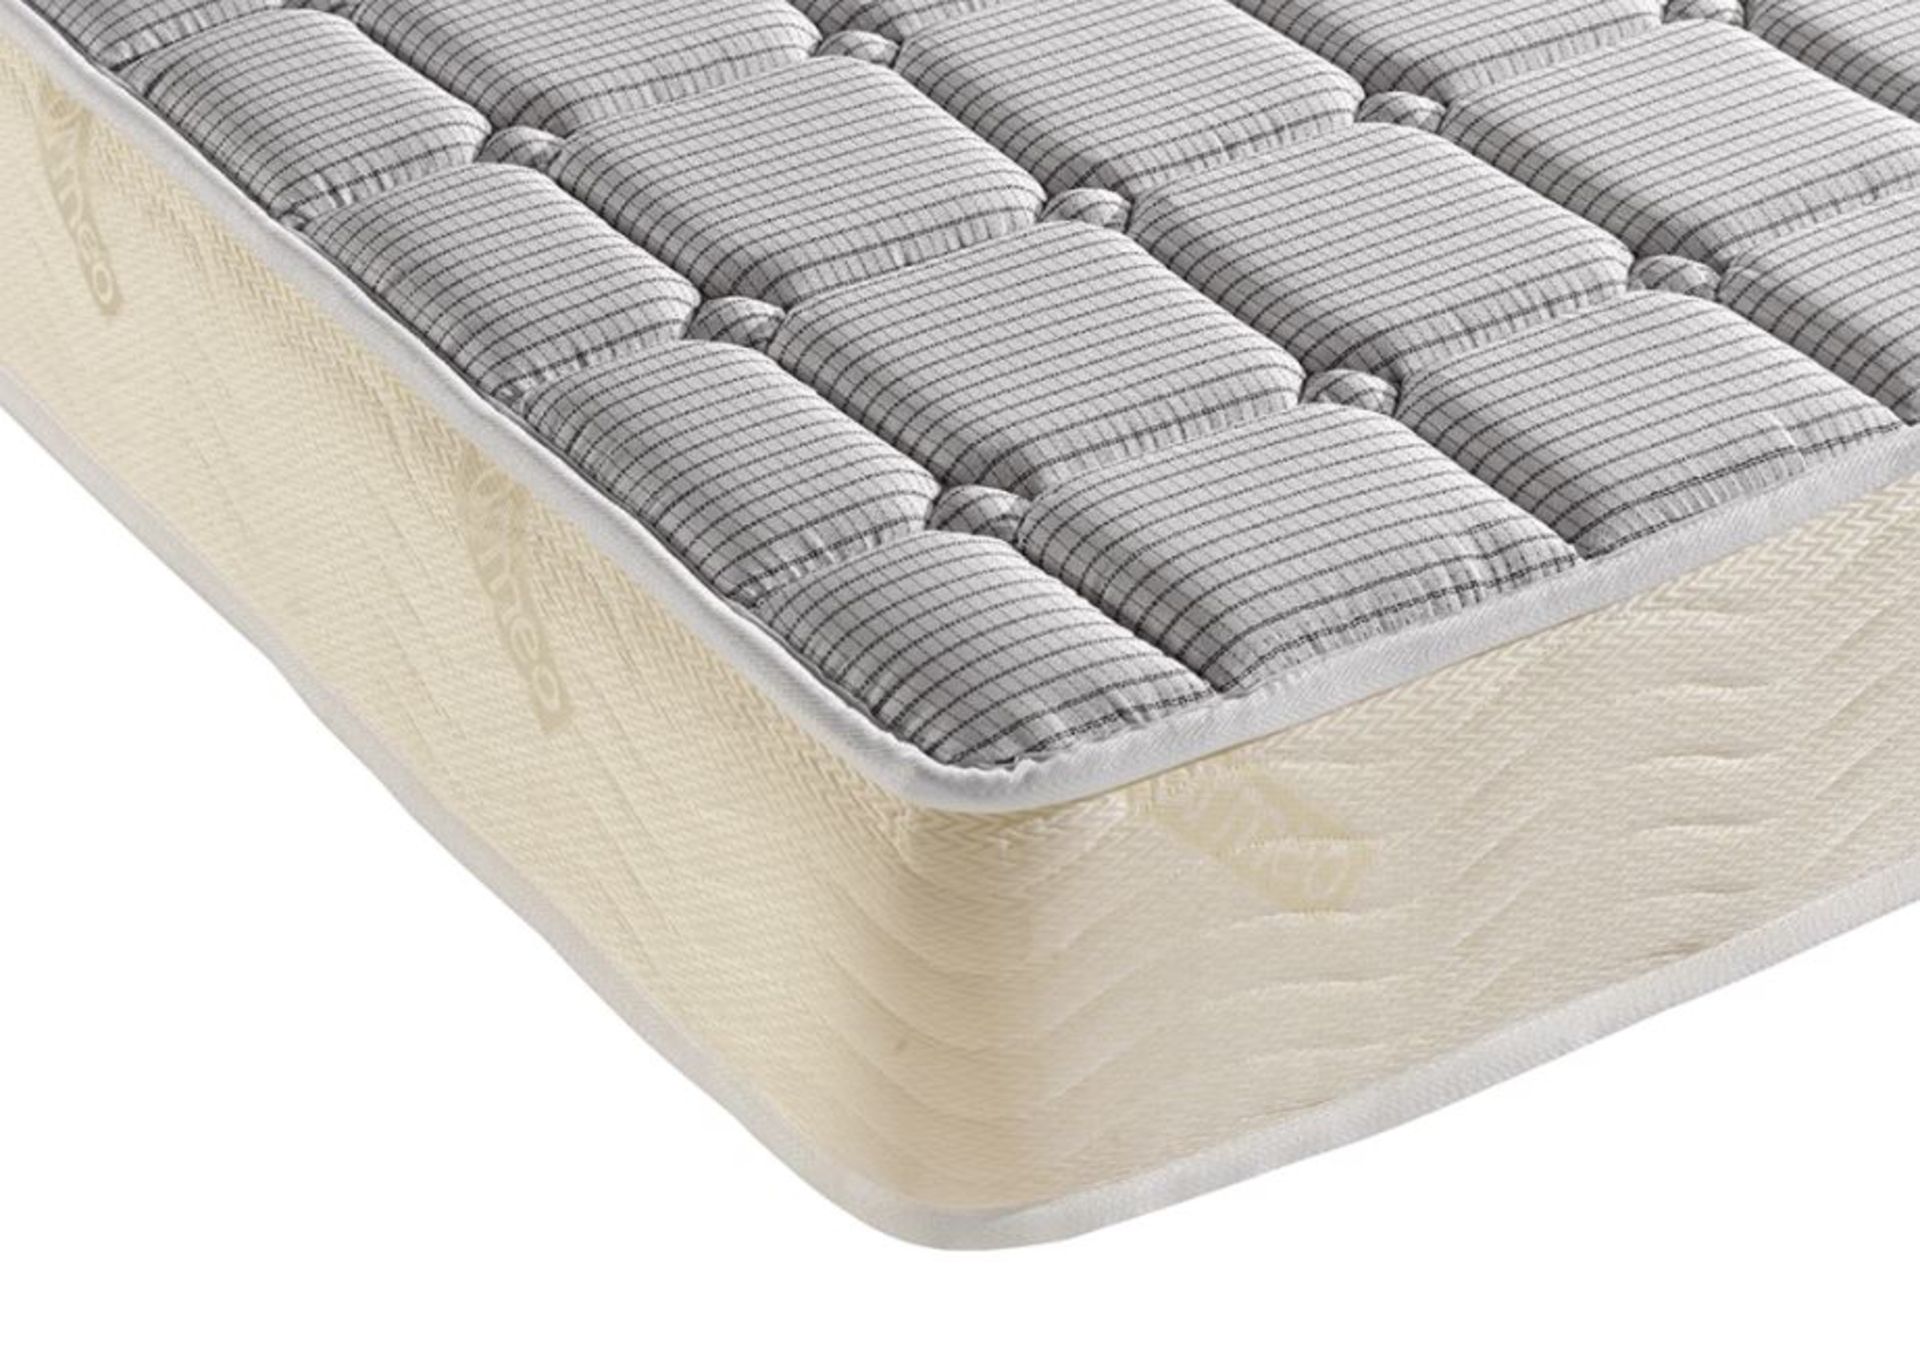 1 DOUBLE SIZE DORMEO MEMORY PLUS SPRUNG MATTRESS RRP Â£249 (PICTURES FOR ILLUSTRATION PURPOSES